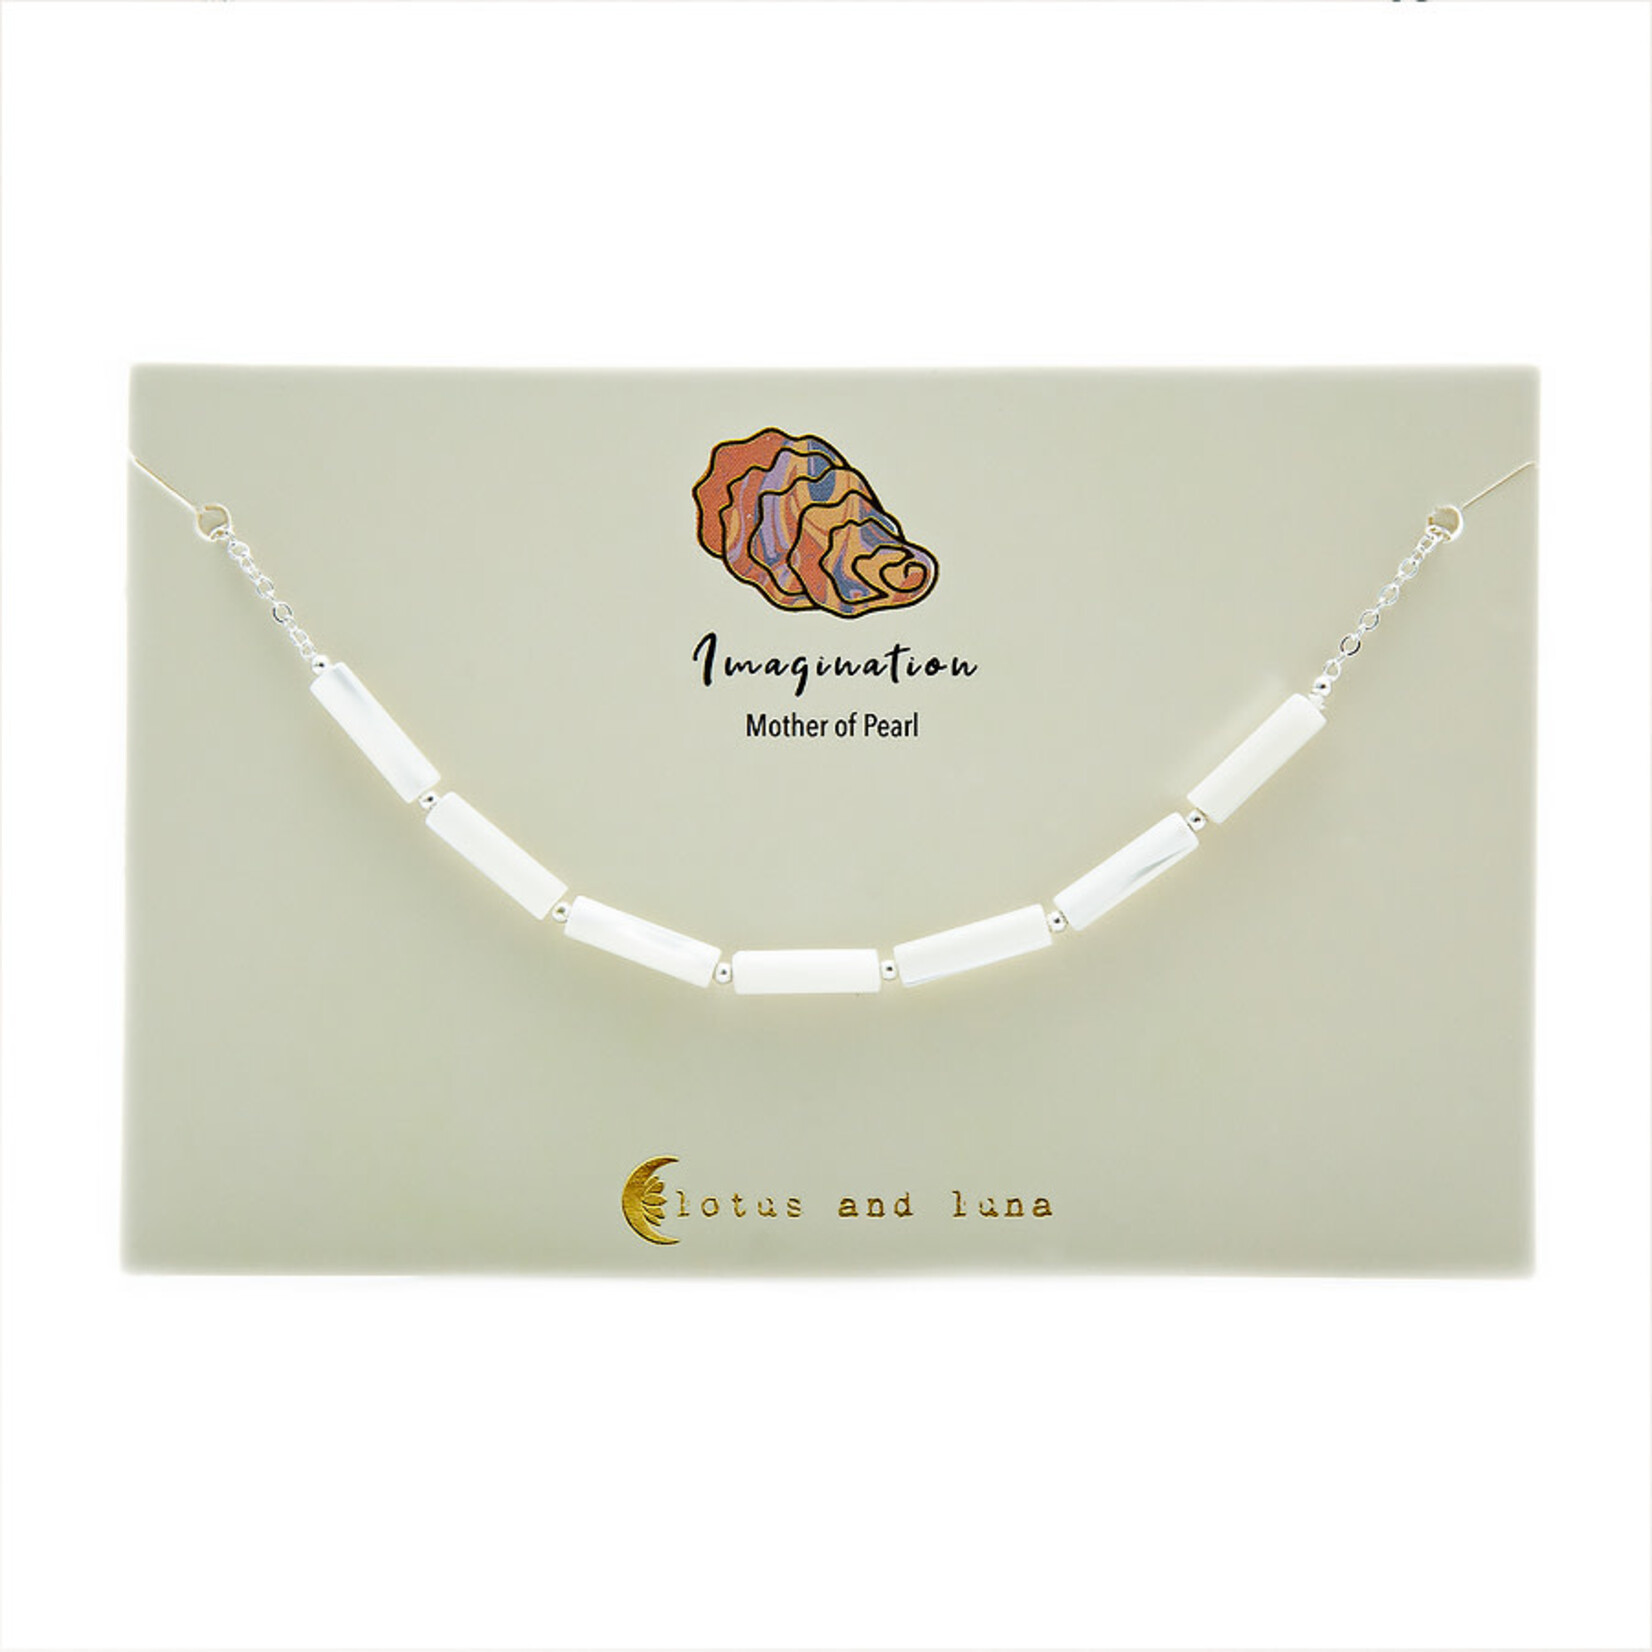 Lotus and Luna Imagination Tube Bead Necklace